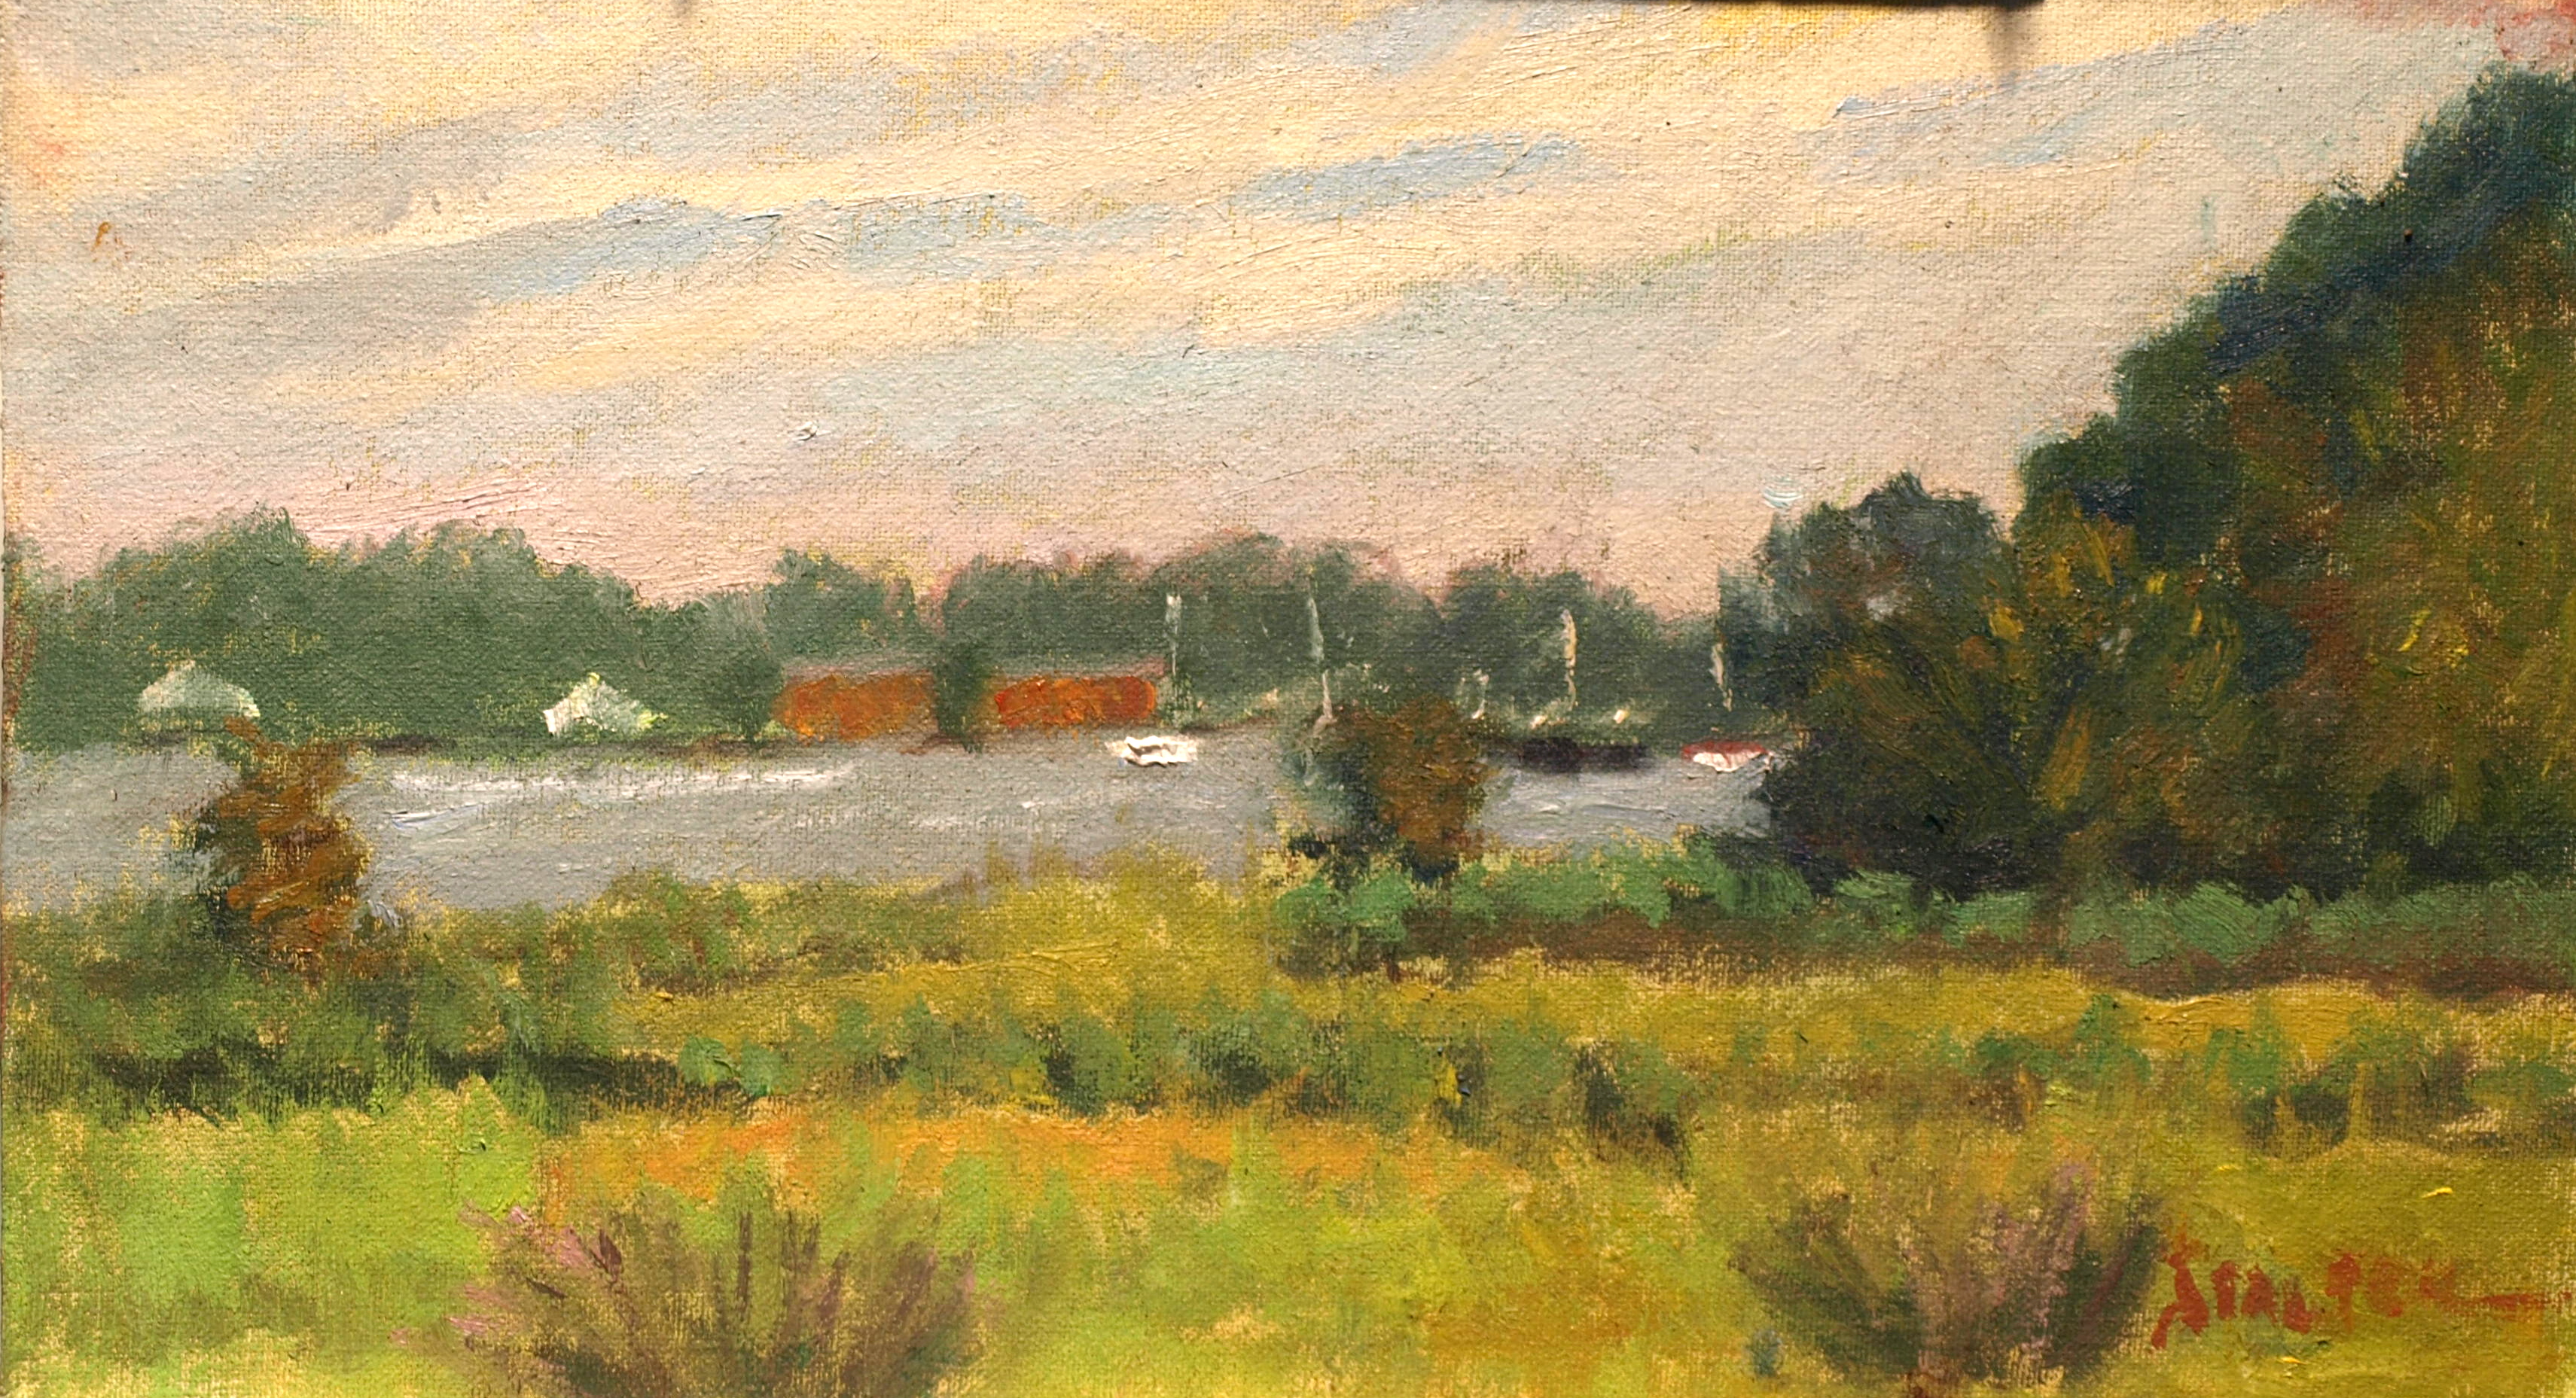 Mystic River Marsh, Oil on Canvas on Panel, 8 x 14 Inches, by Richard Stalter, $225